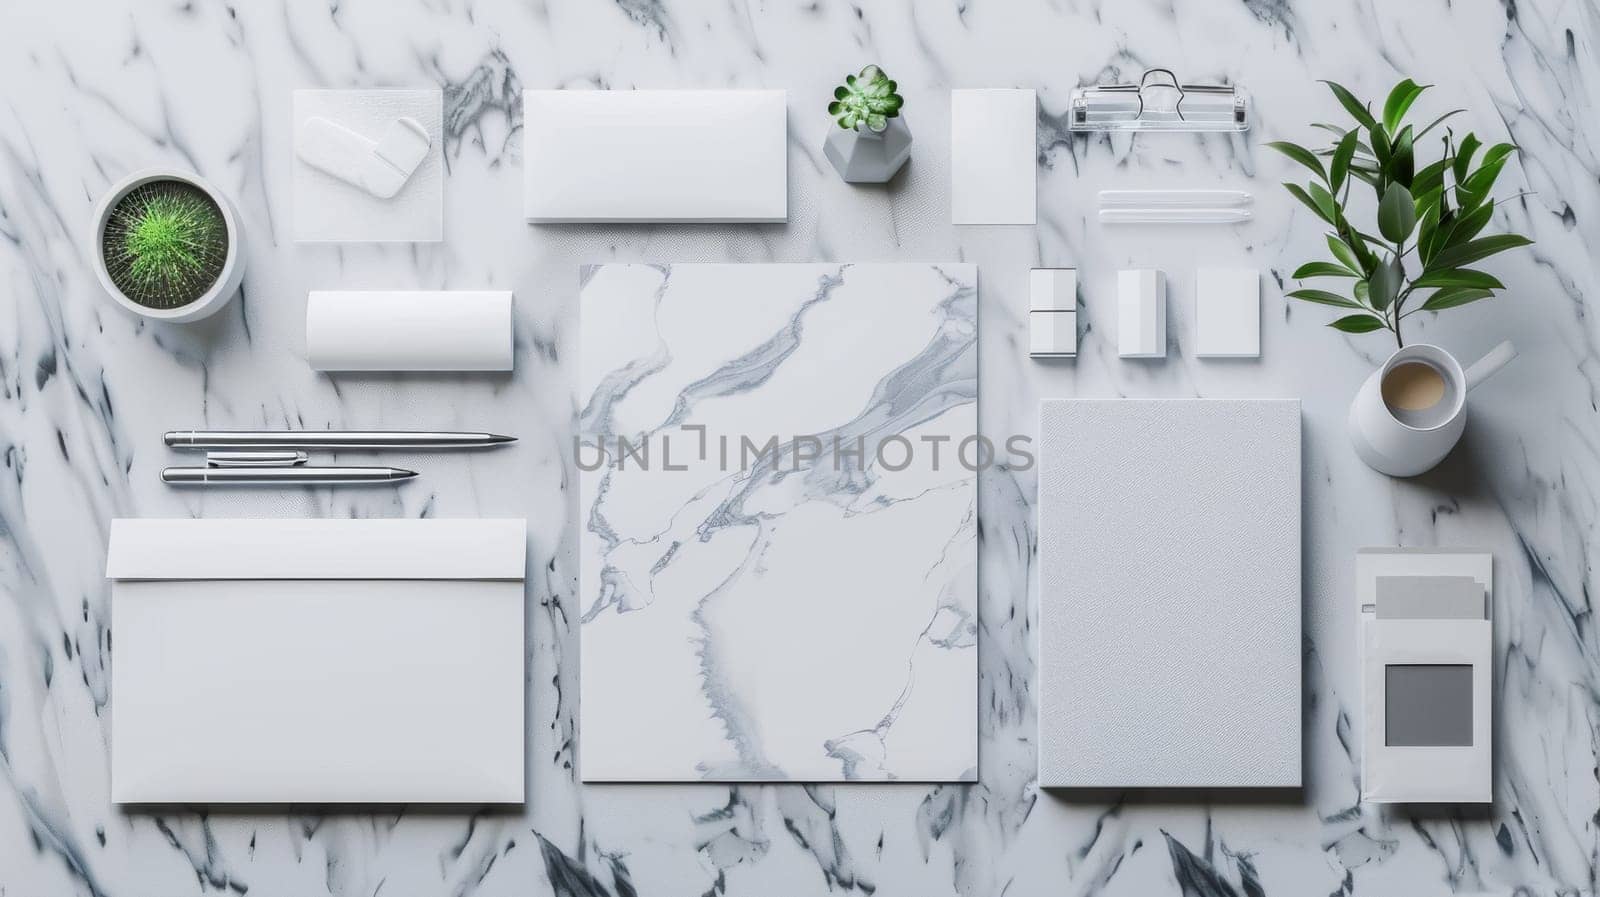 A marble countertop with a variety of business stationery items